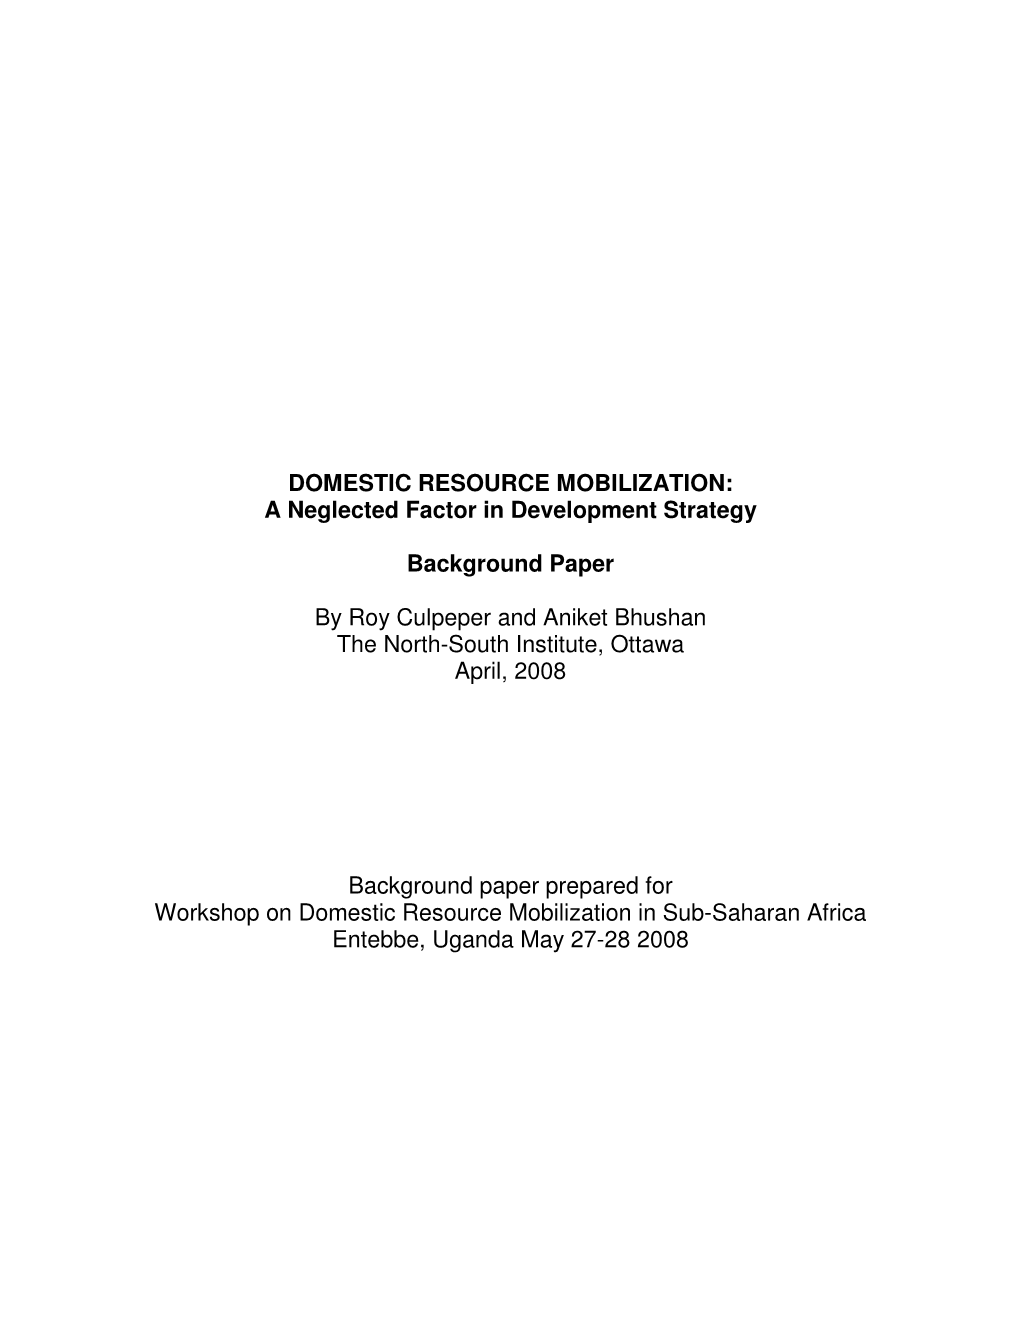 DOMESTIC RESOURCE MOBILIZATION: a Neglected Factor in Development Strategy